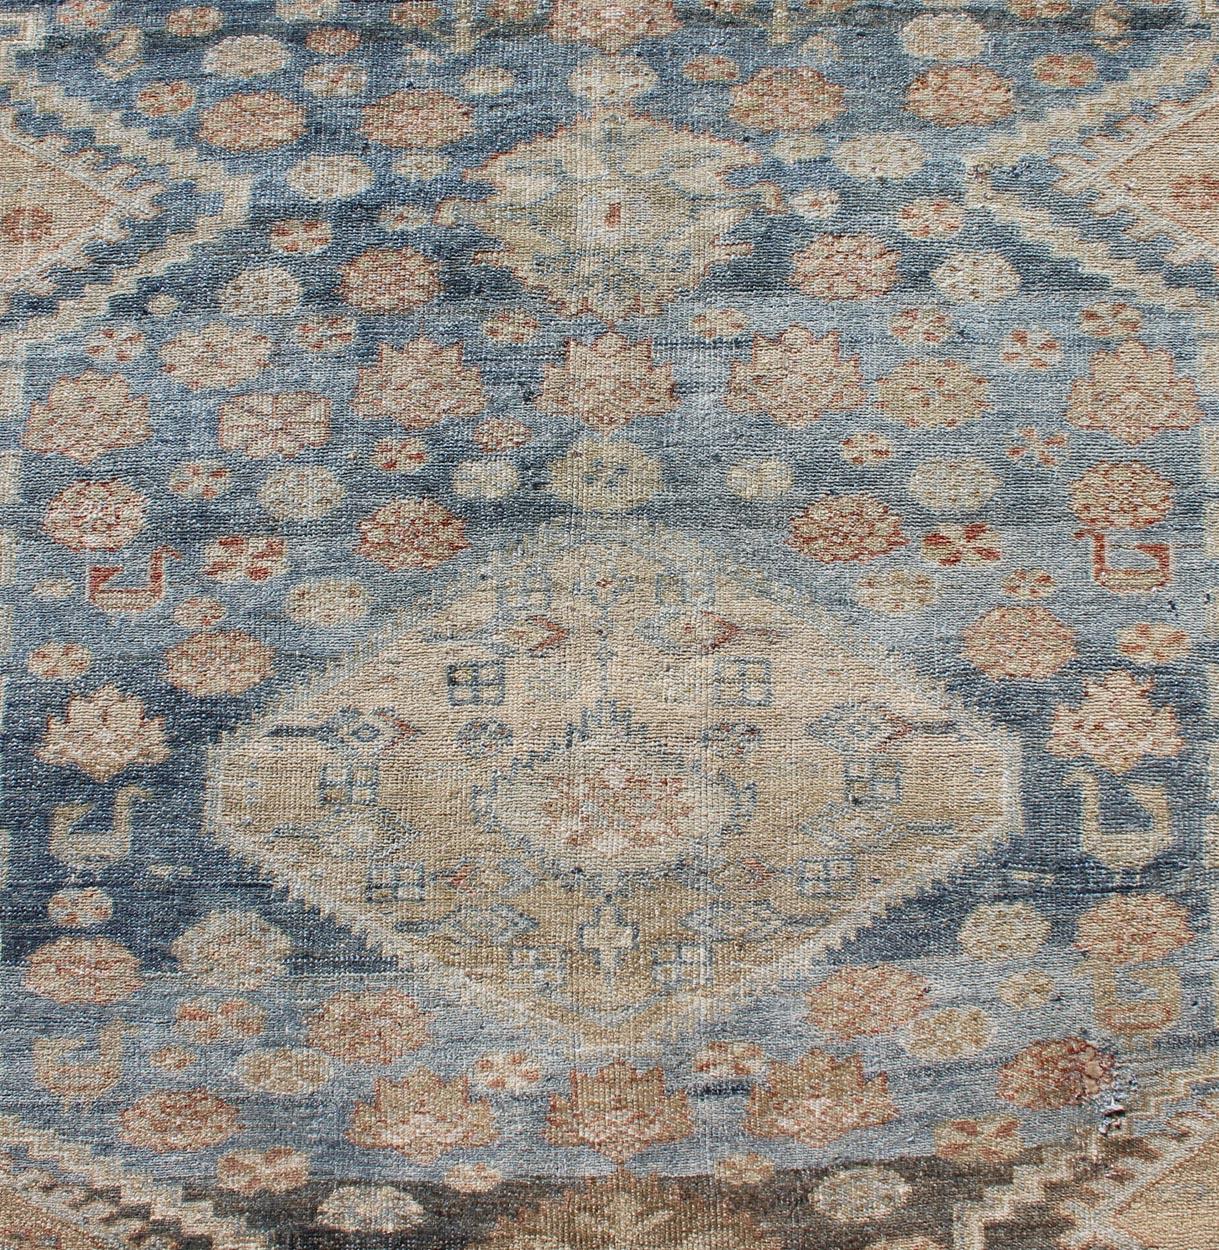 Tribal Persian Malayer Rug with Geometric Design in Steel Blue and Tan Tones 4